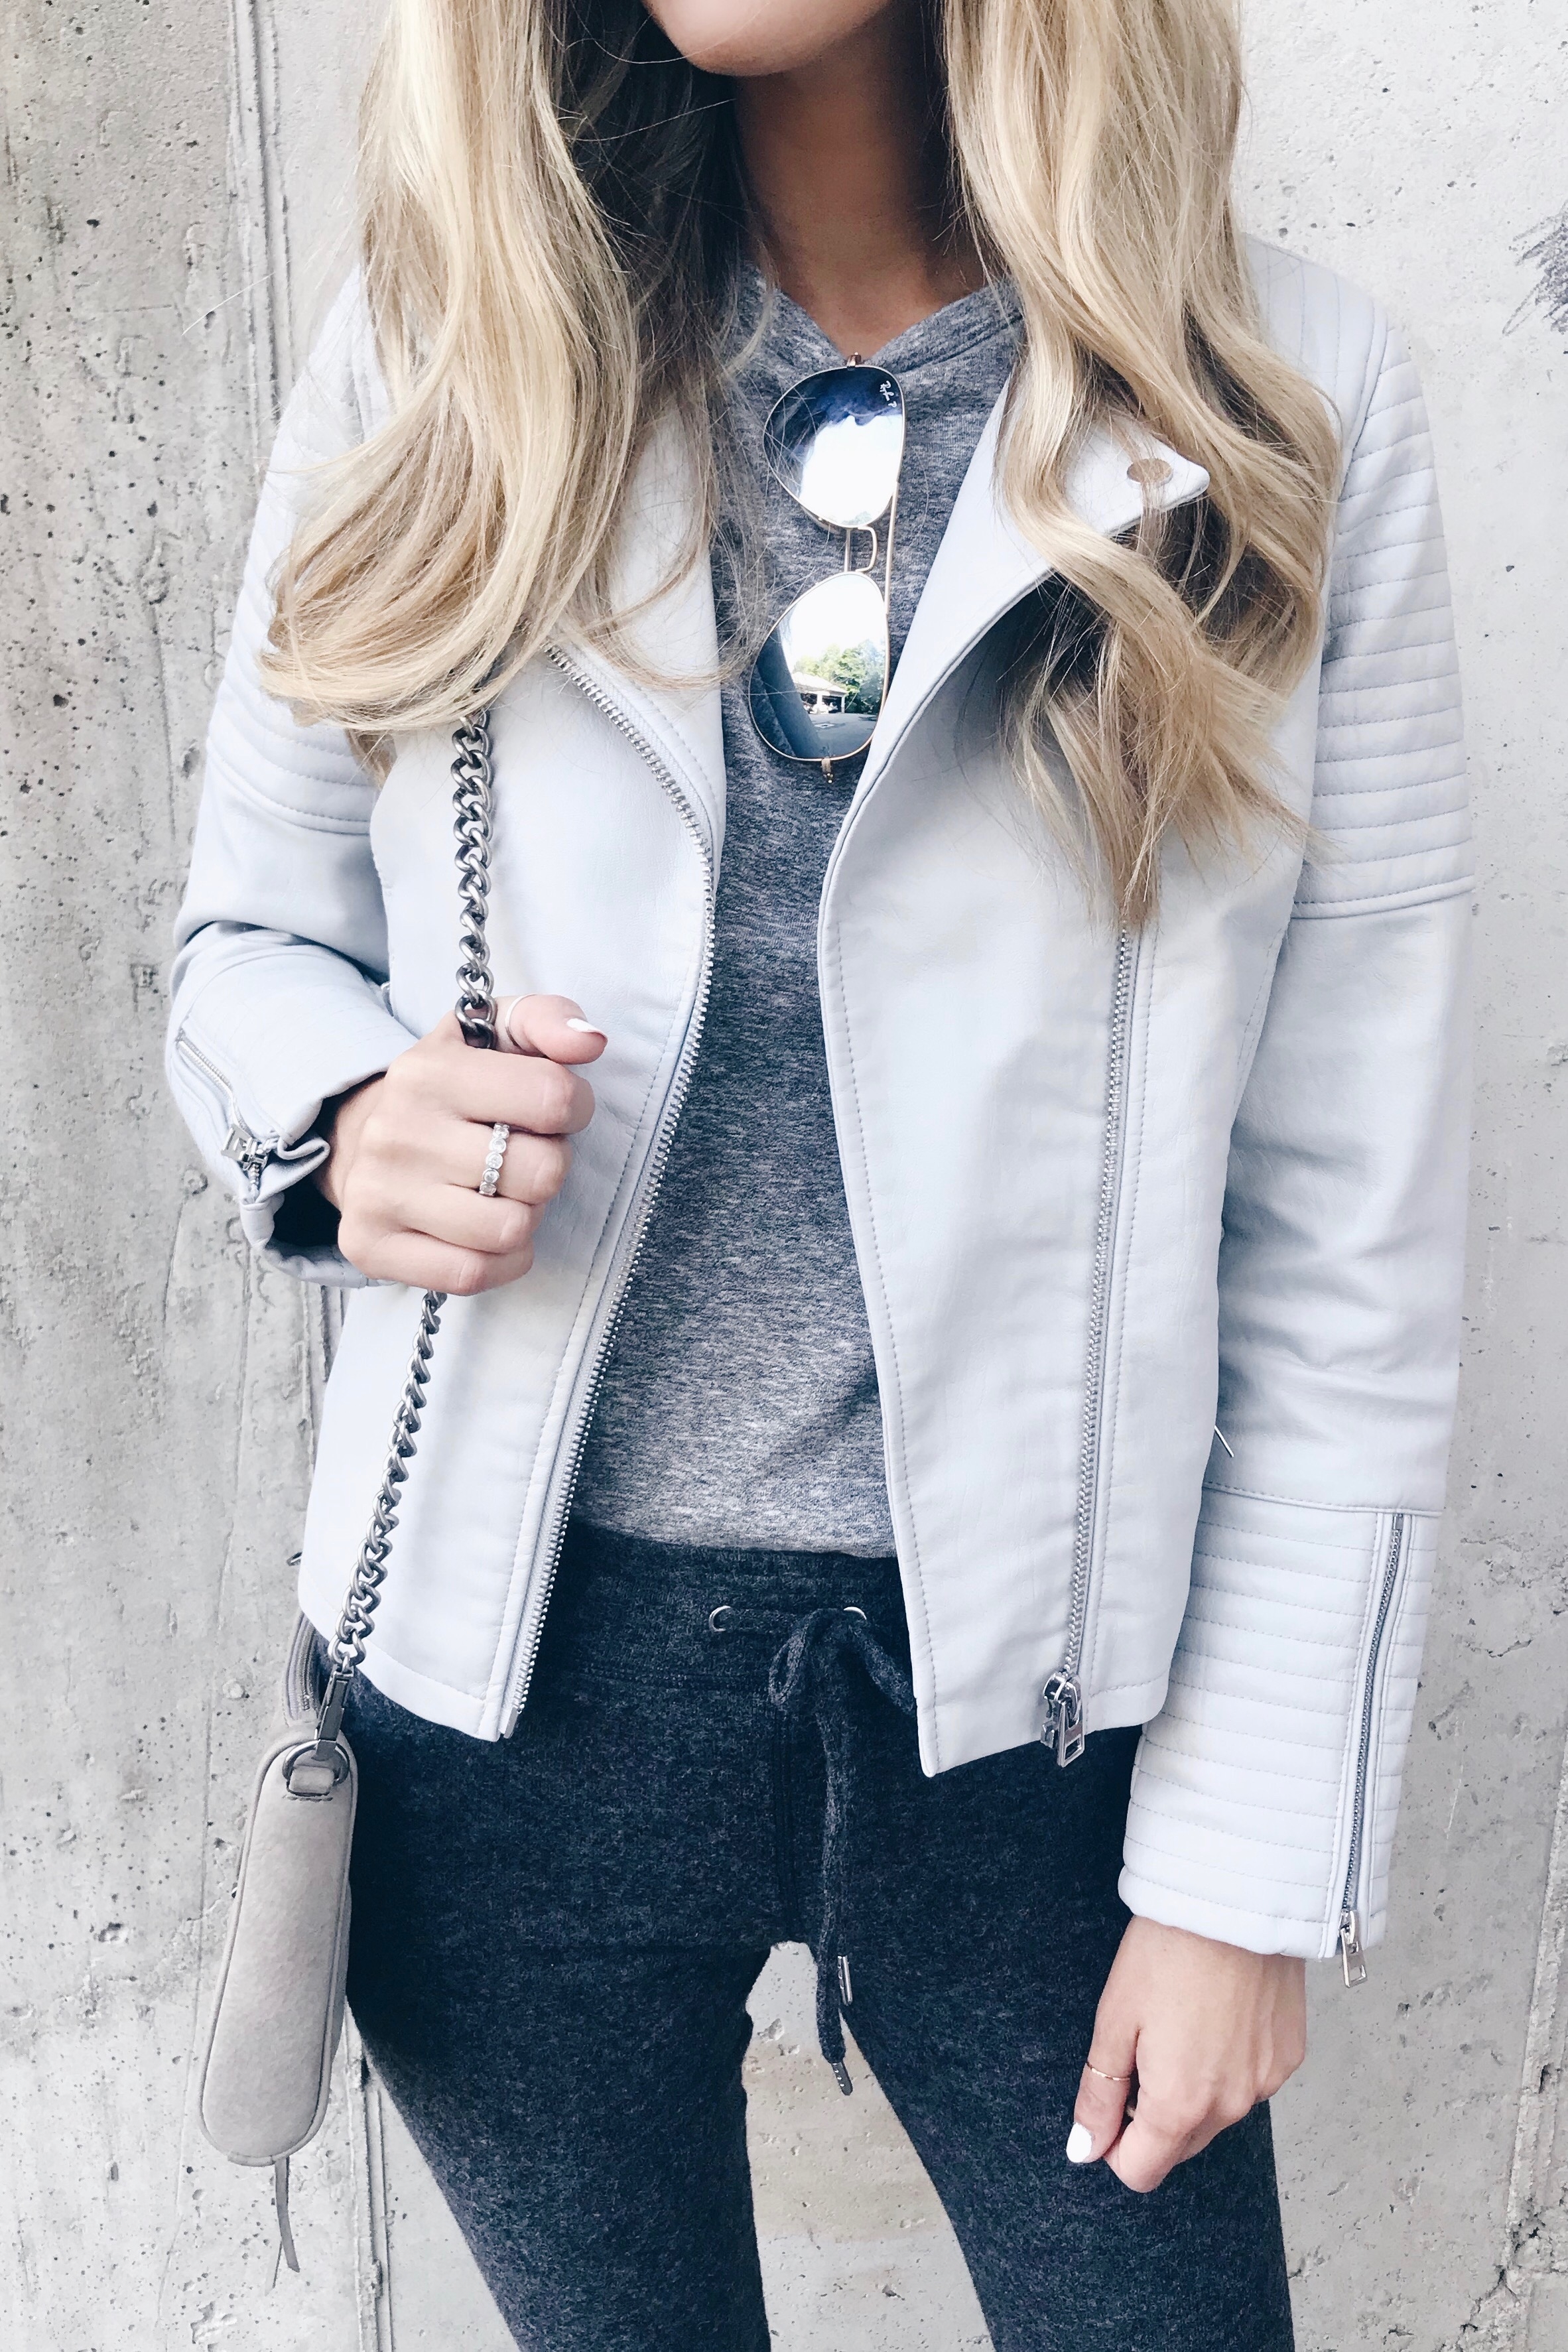 Athleisure outfit - topshop moto jacket and joggers on Pinteresting Plans fashion blog